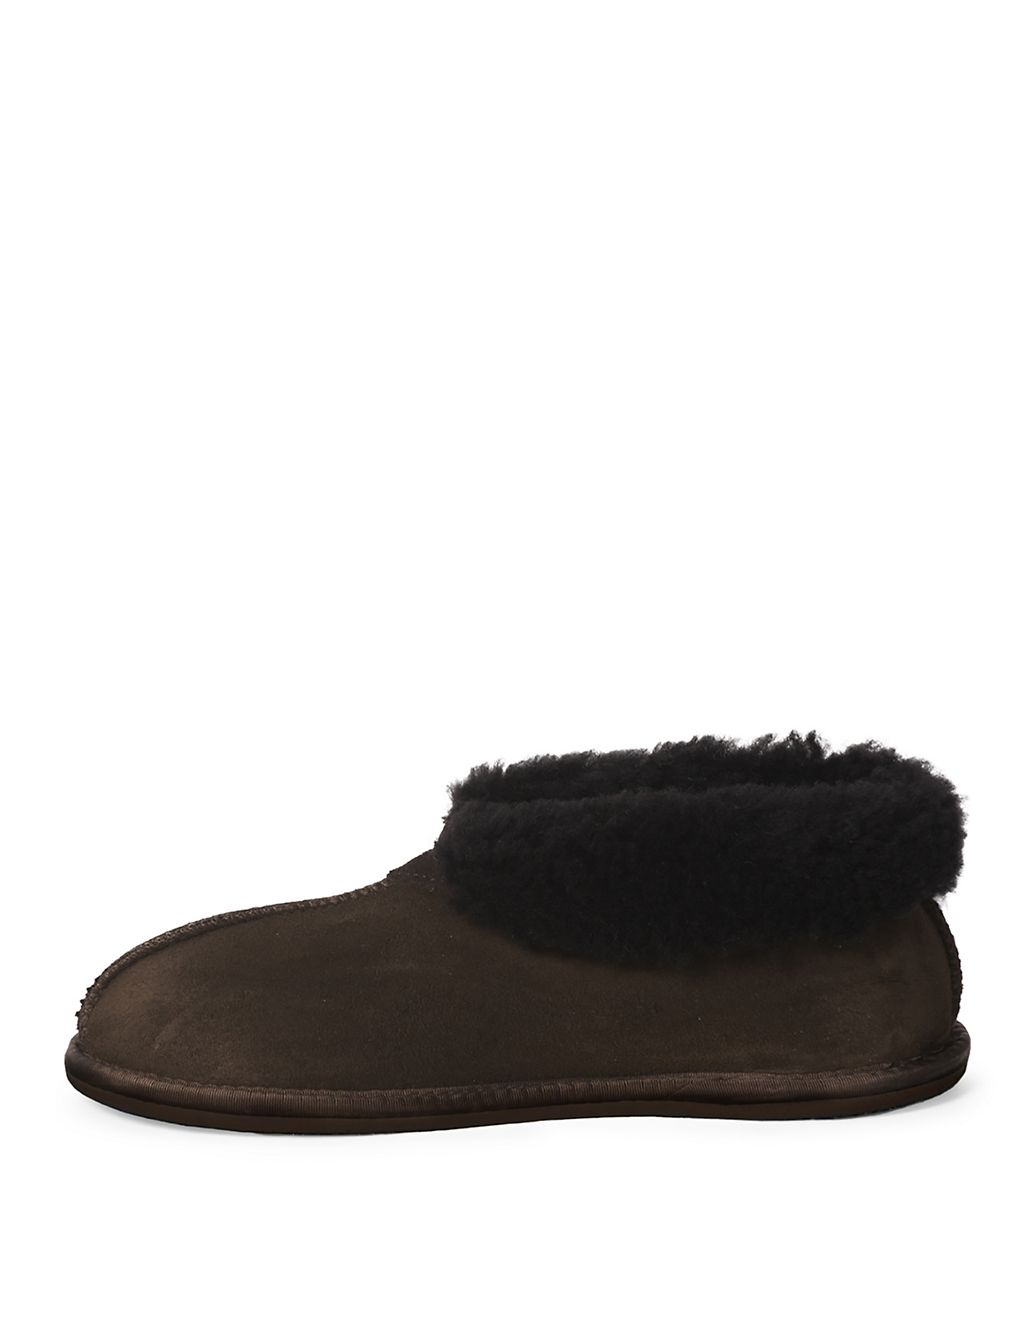 Suede Slipper Boots 1 of 3